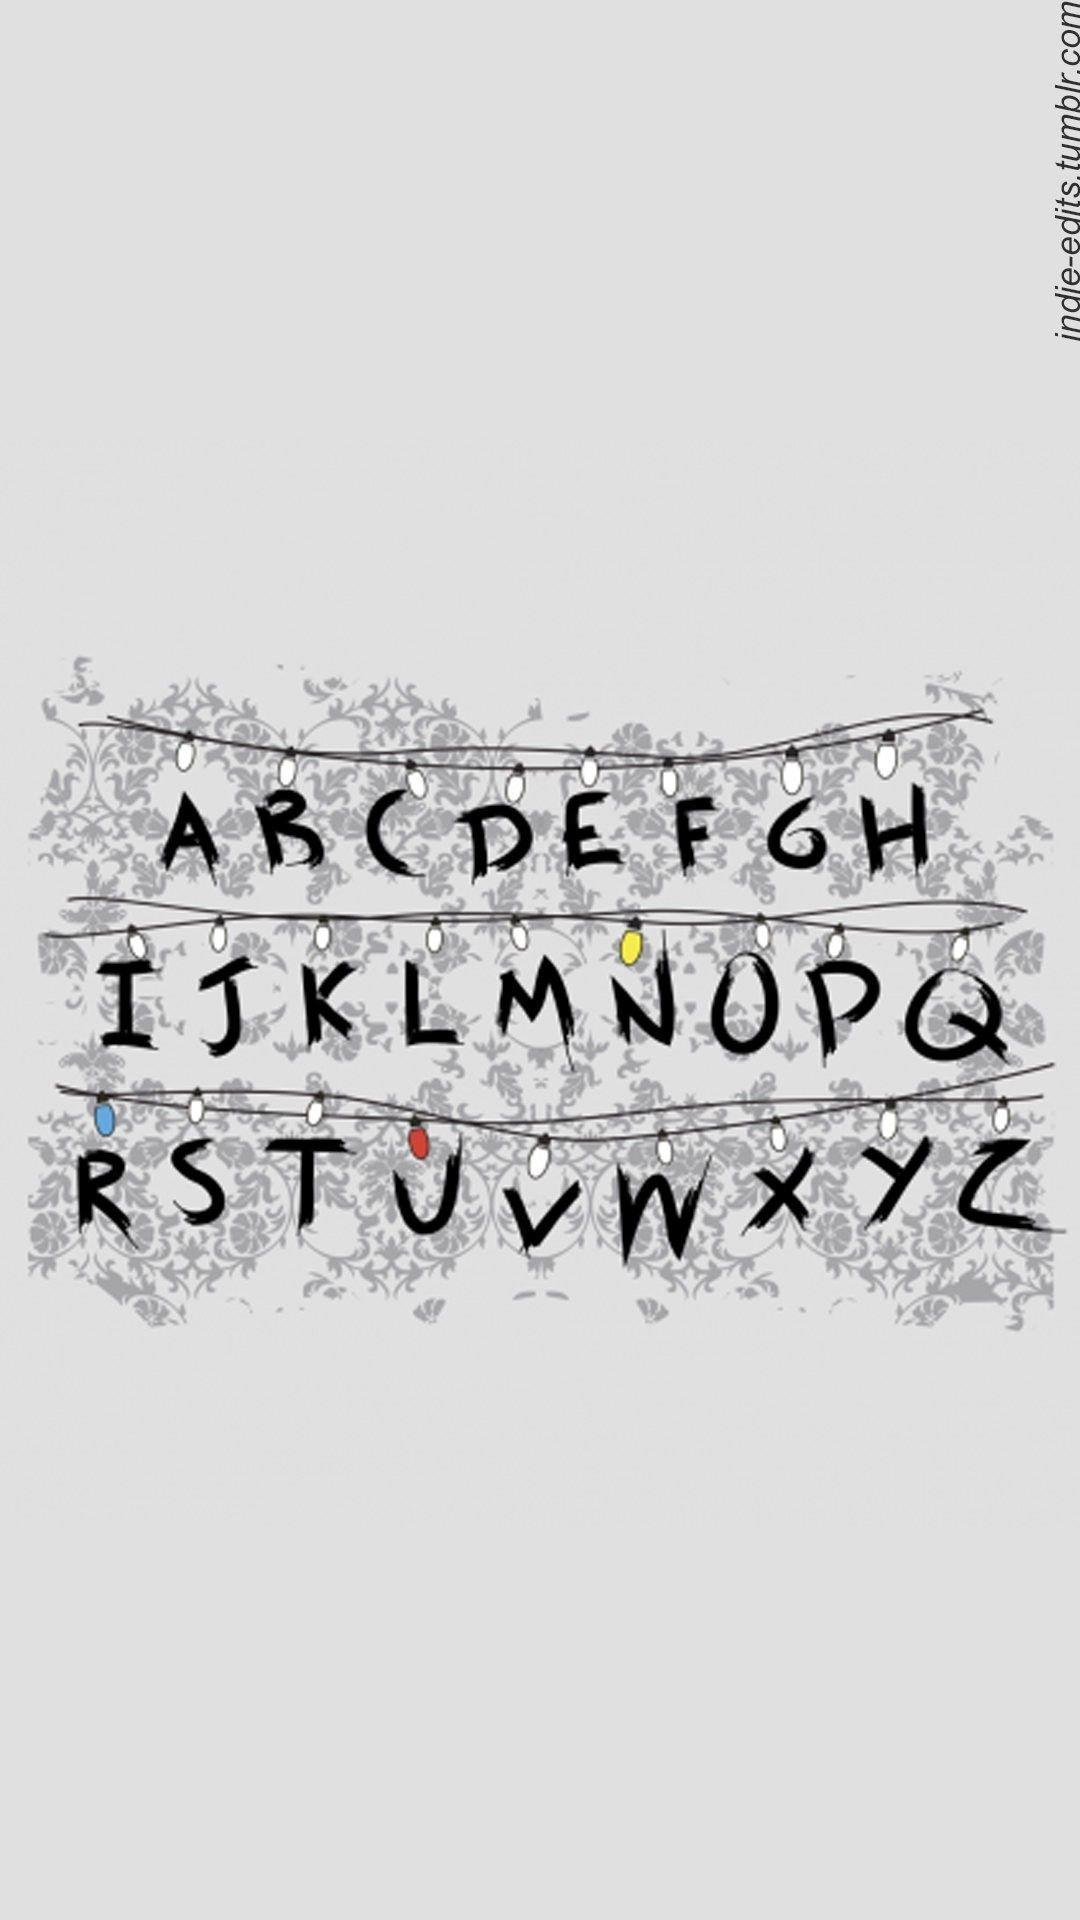 A picture of an alphabet with the letters in different colors - Stranger Things